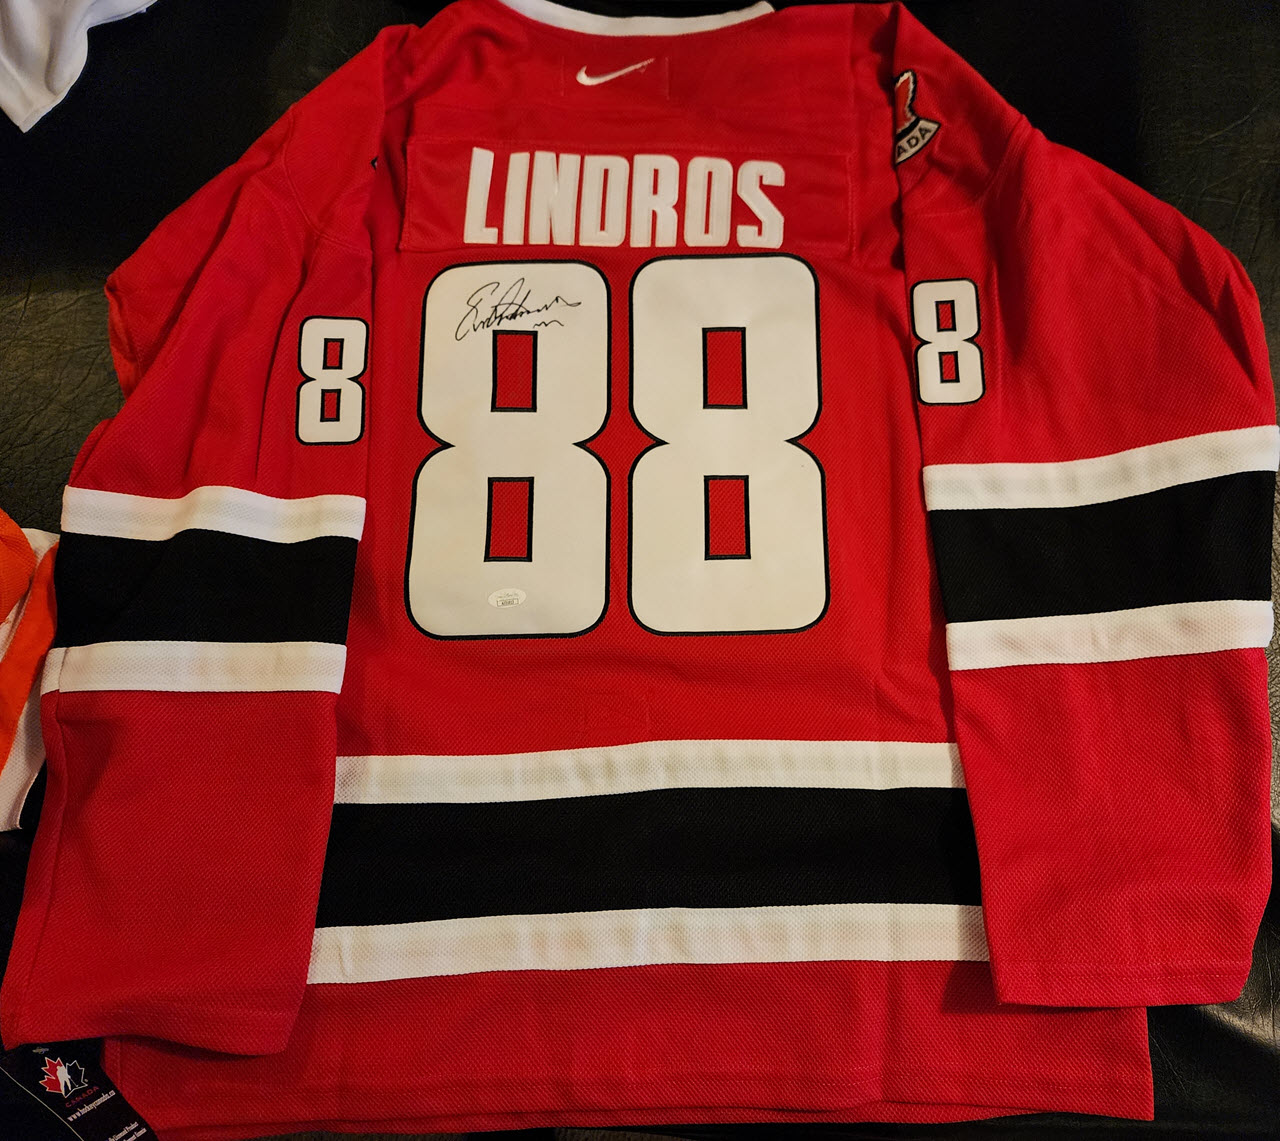 Eric Lindros Autographed RedBlack 2002 Olympic Nike Throwback Jersey v2